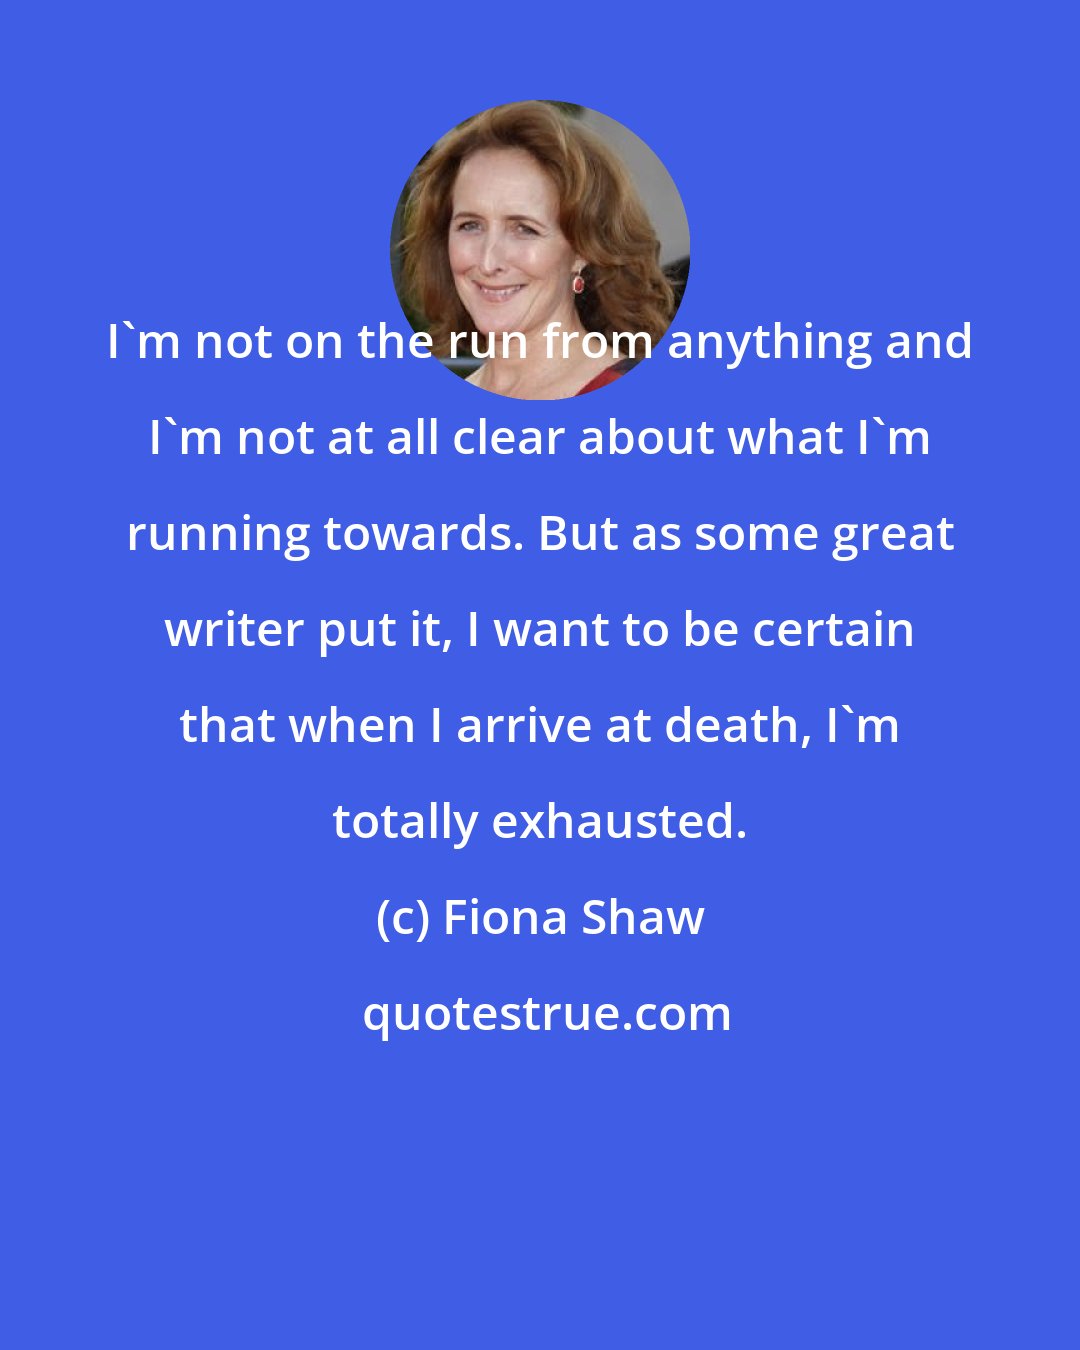 Fiona Shaw: I'm not on the run from anything and I'm not at all clear about what I'm running towards. But as some great writer put it, I want to be certain that when I arrive at death, I'm totally exhausted.